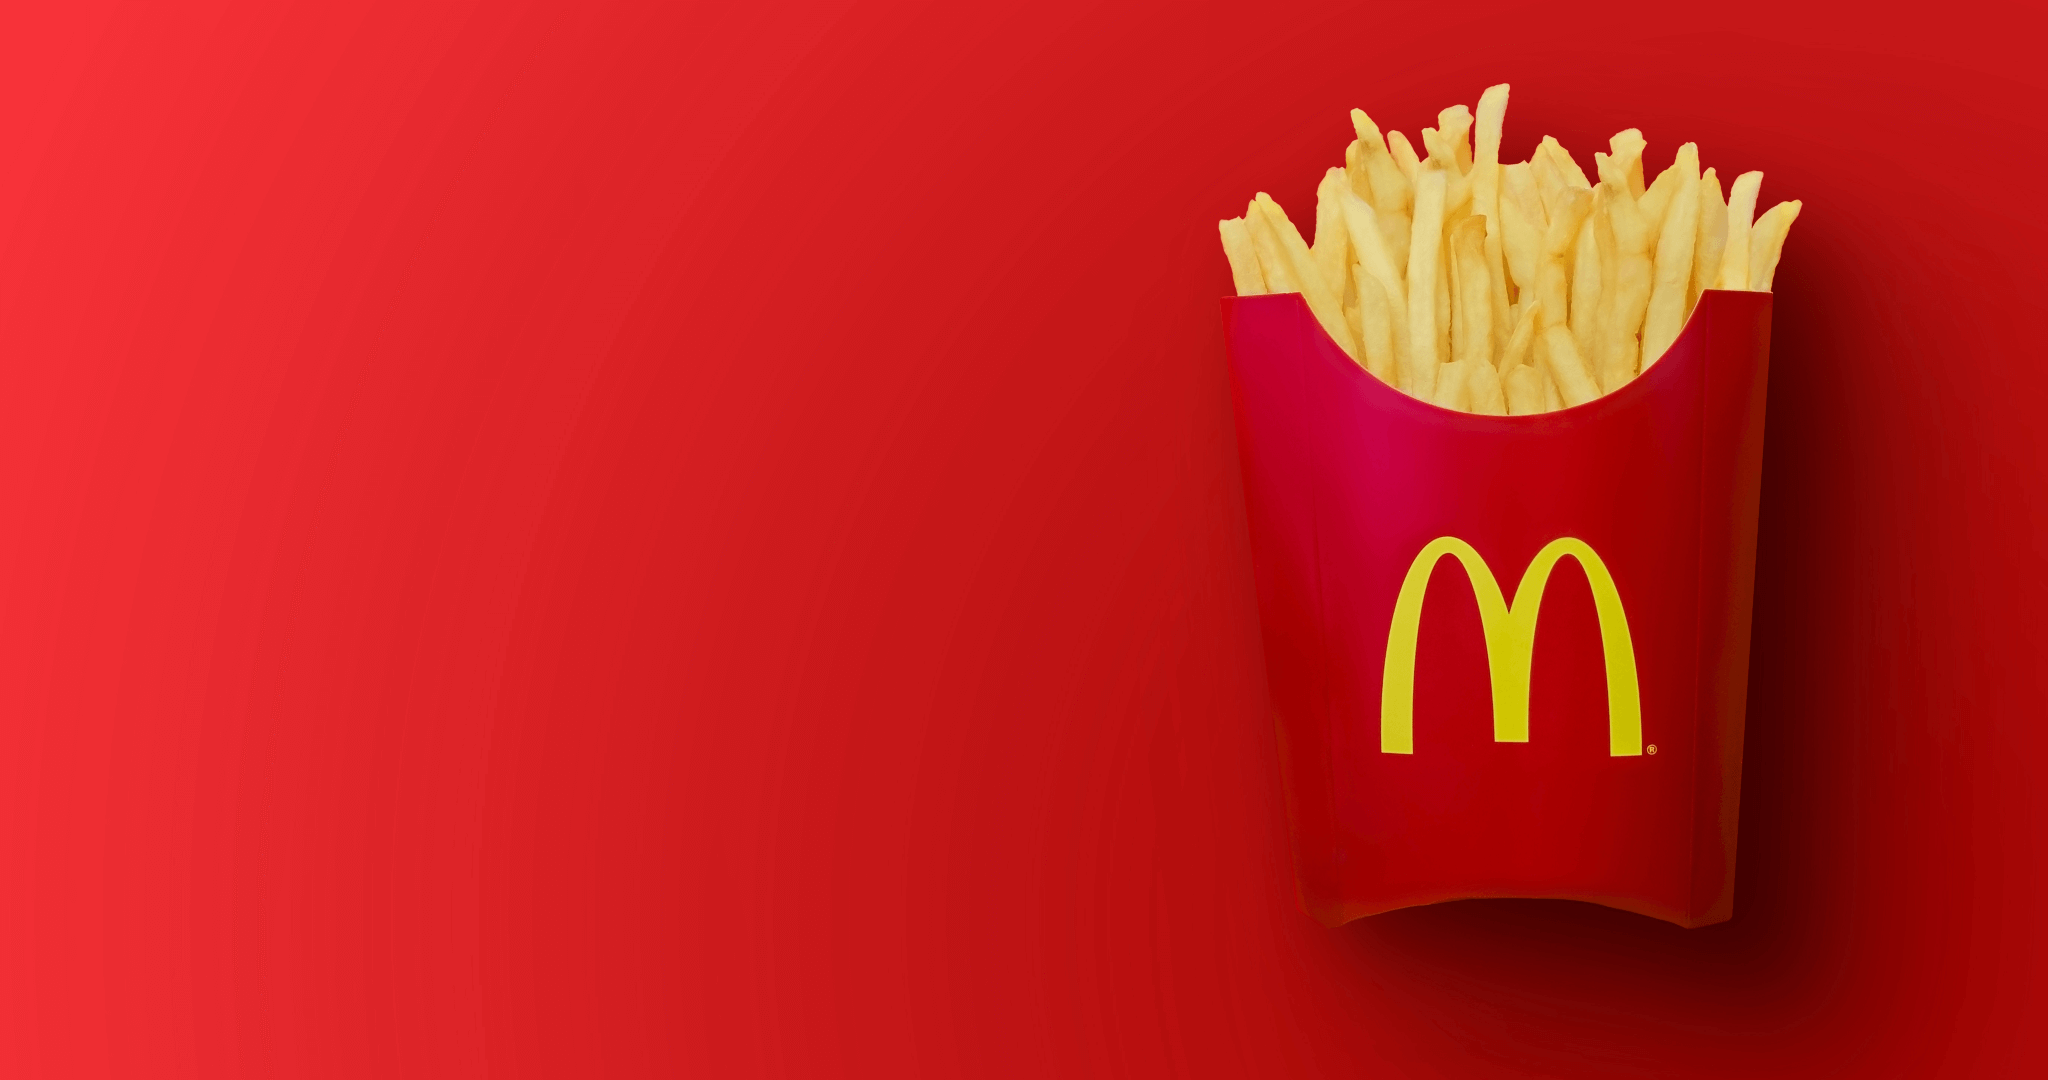 McDonalds fries on red background